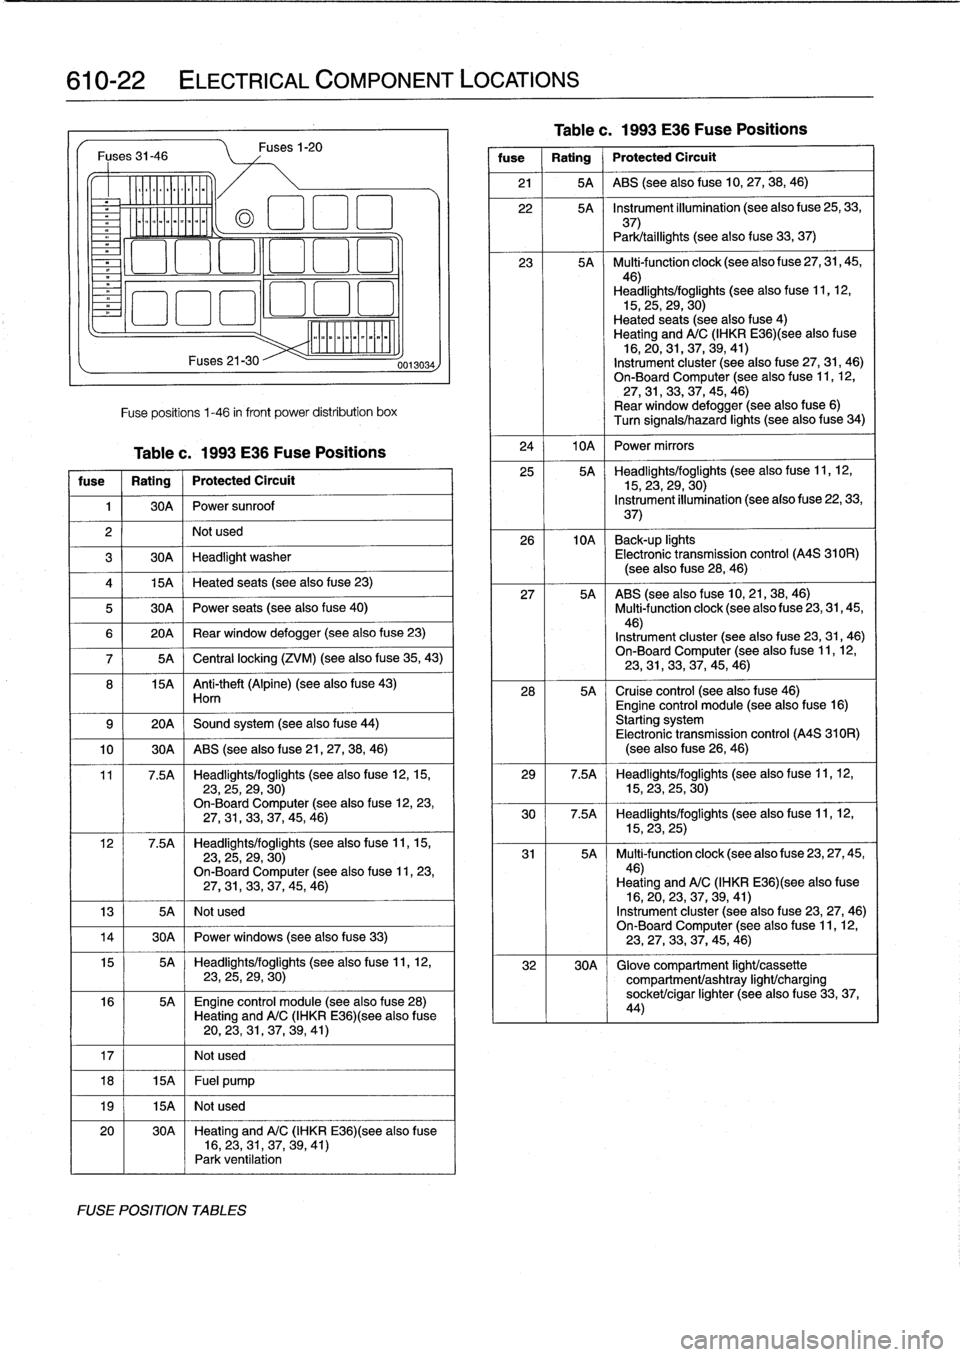 BMW 325i 1994 E36 Workshop Manual 
610-22

	

ELECTRICAL
COMPONENT
LOCATIONS

Fuses
31-46

Ylililll

milililil
Fuses
21-30
Fuse
positions
1-46
in
front
Power
distribution
box

Table
c
.
1993
E36
Fuse
Positions

fuse

	

1
Rating

	

j